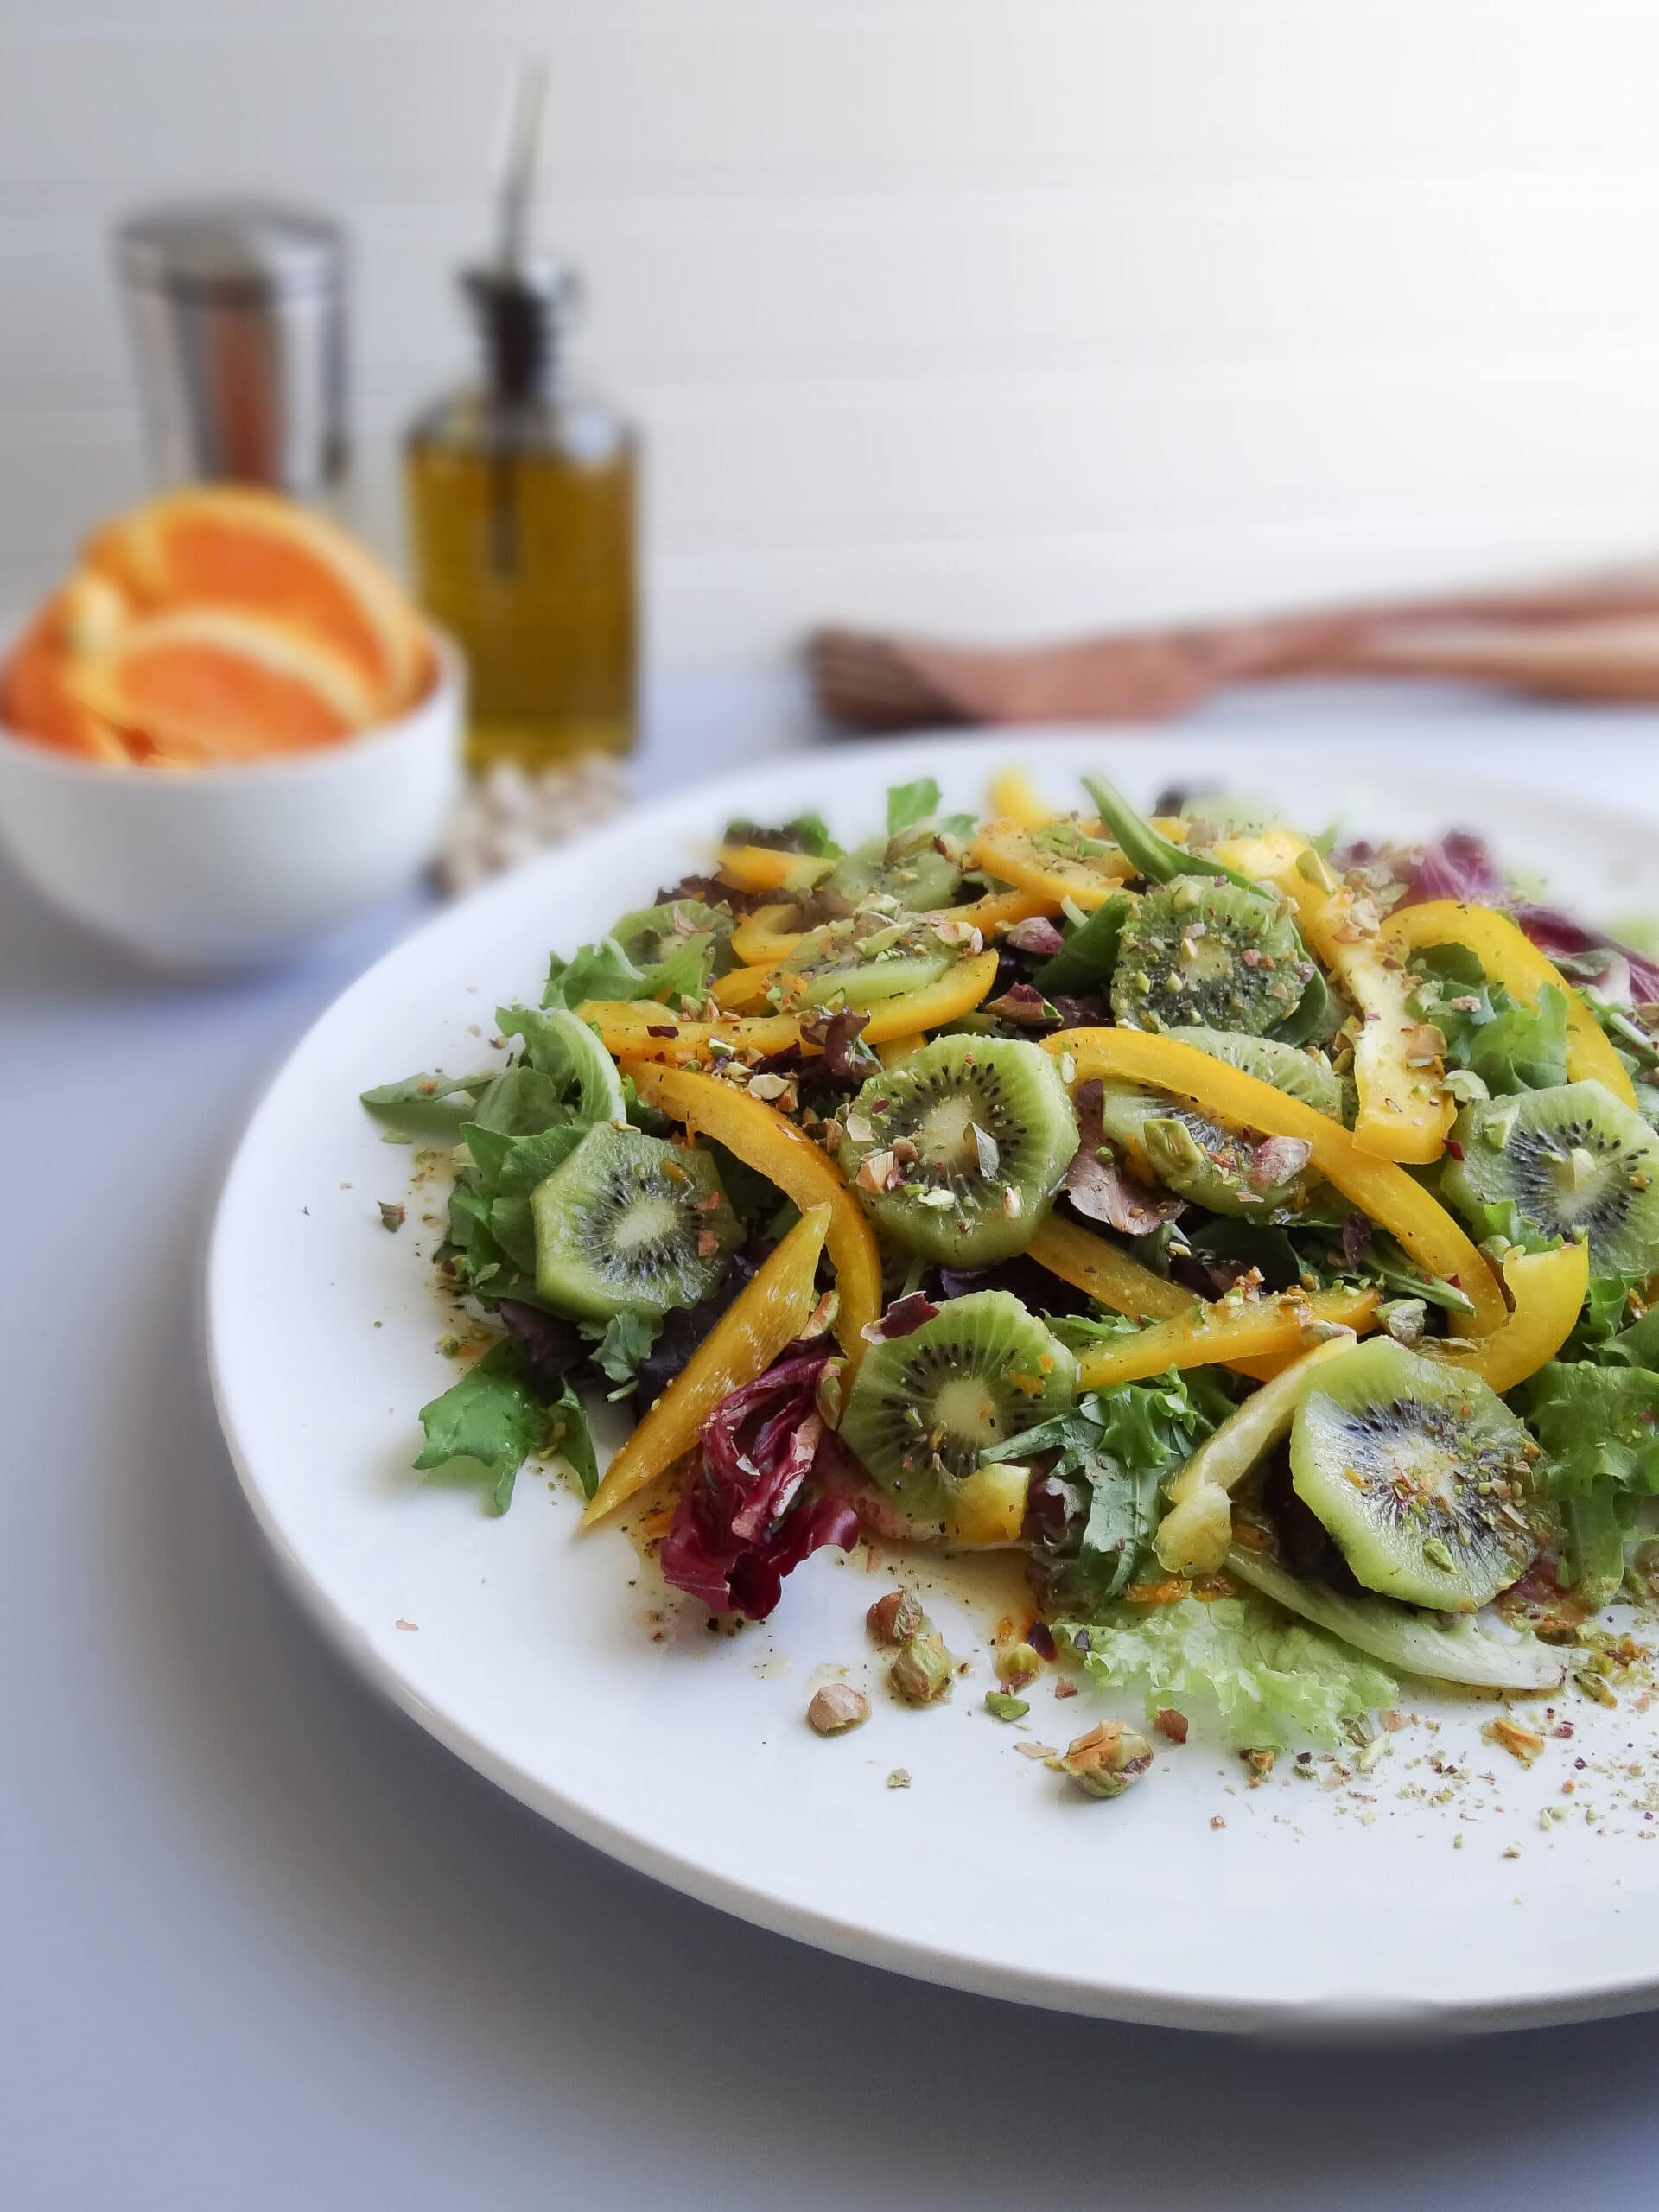 Kiwi Herb Salad with Pistachios and Orange DressingSharon PalmerSharon Palmer, The Plant Powered Dietitian